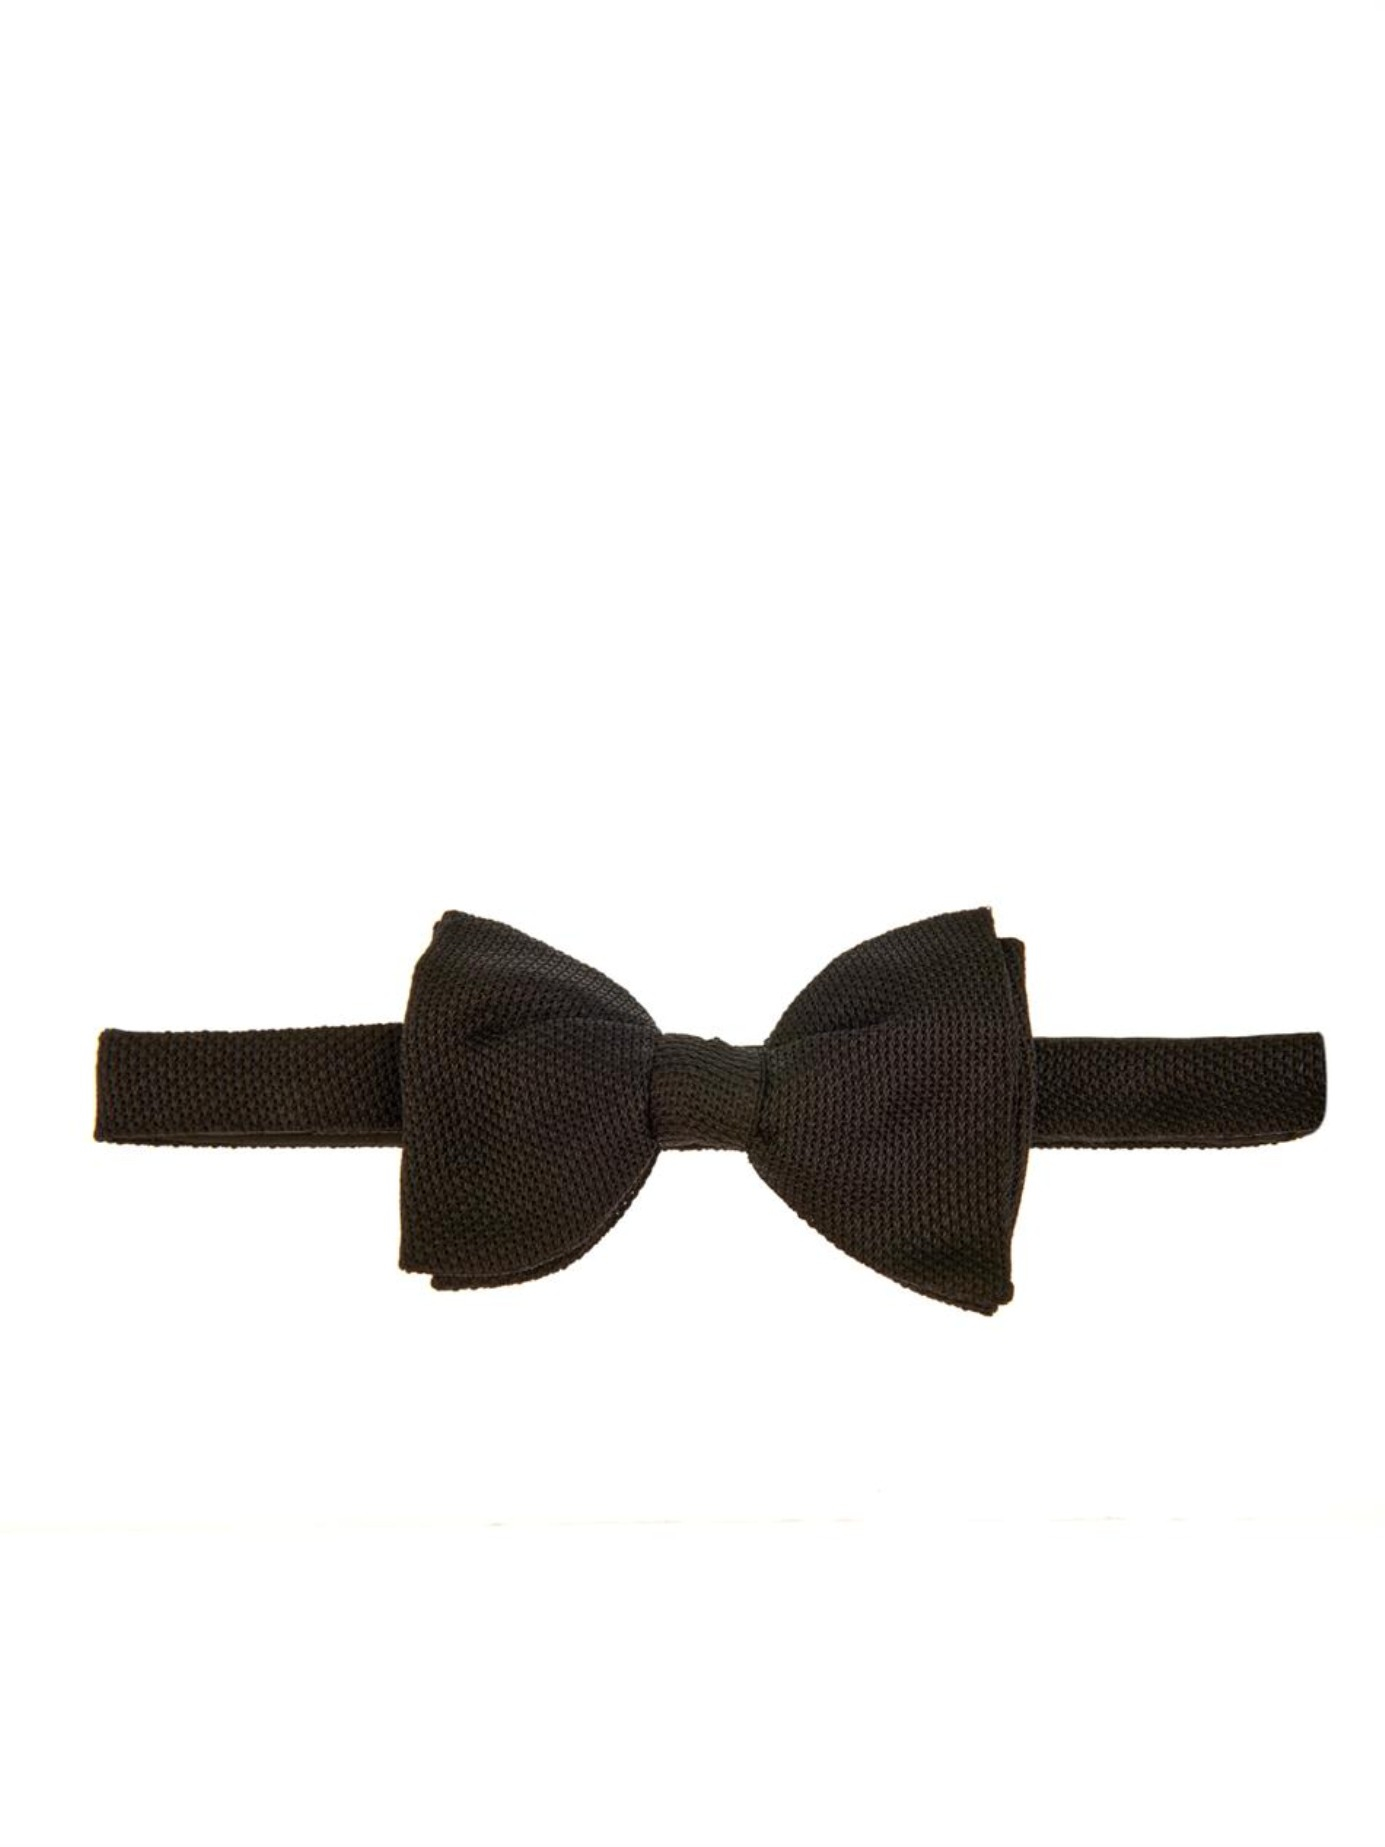 Lanvin Silk Geometric-embroidered Bow-tie in Black for Men Mens Accessories Ties 